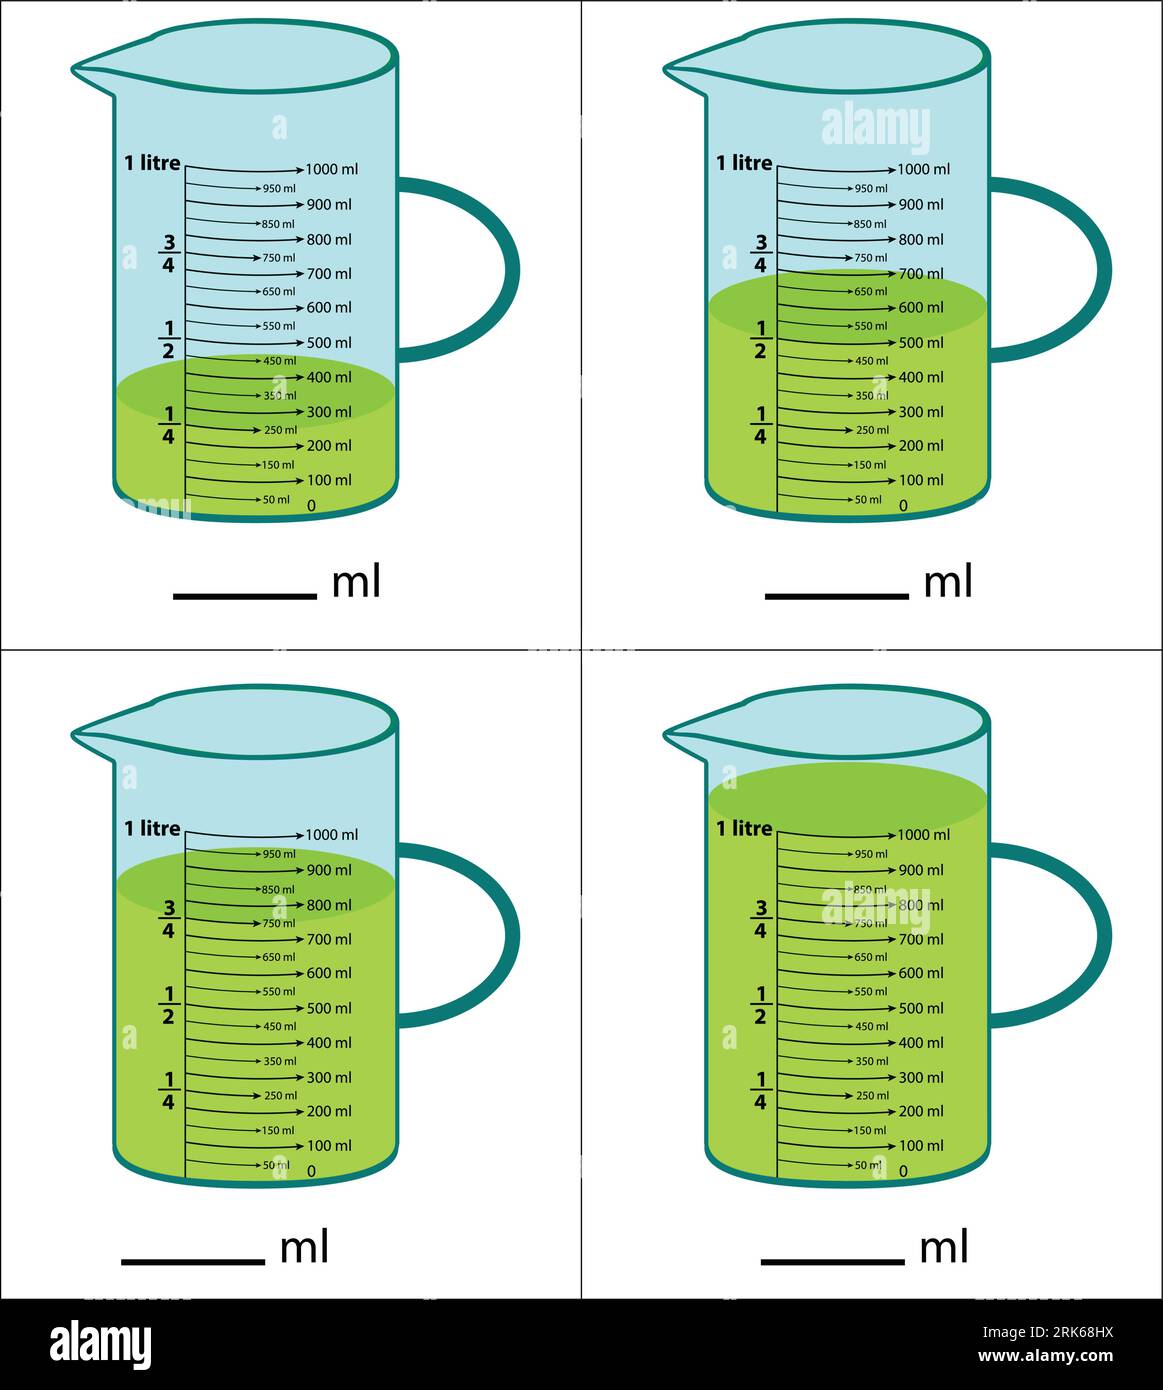 https://c8.alamy.com/comp/2RK68HX/scale-measuring-1-liter-jug-1000ml-with-measuring-scale-beaker-for-chemical-experiments-in-the-laboratory-vector-illustration-2RK68HX.jpg